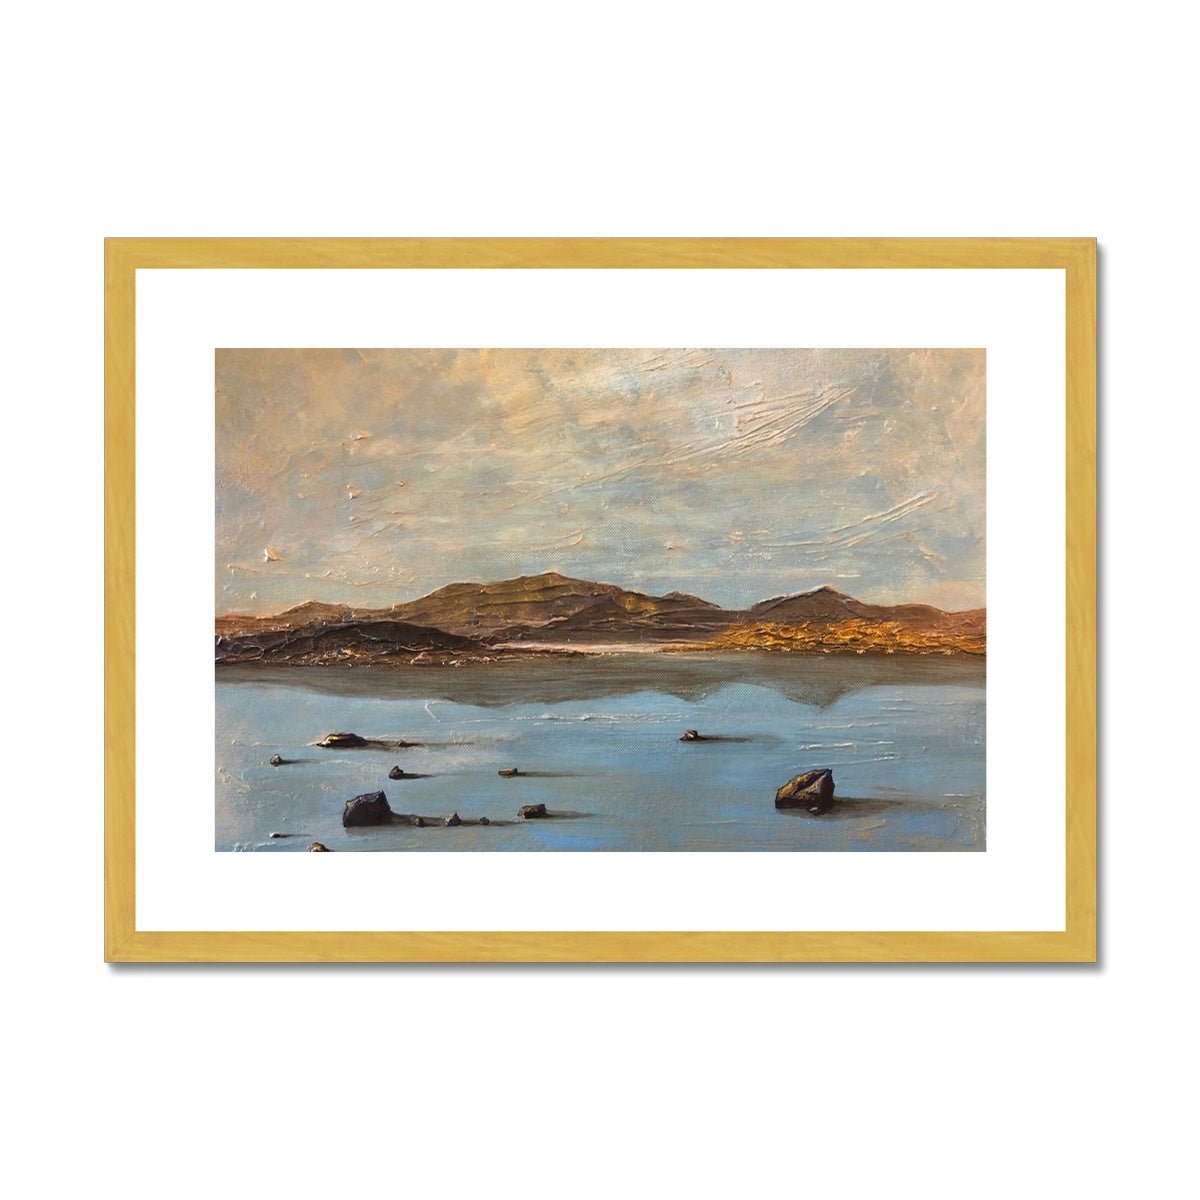 Loch Druidibeg South Uist Painting | Antique Framed & Mounted Prints From Scotland-Antique Framed & Mounted Prints-Scottish Lochs Art Gallery-A2 Landscape-Gold Frame-Paintings, Prints, Homeware, Art Gifts From Scotland By Scottish Artist Kevin Hunter